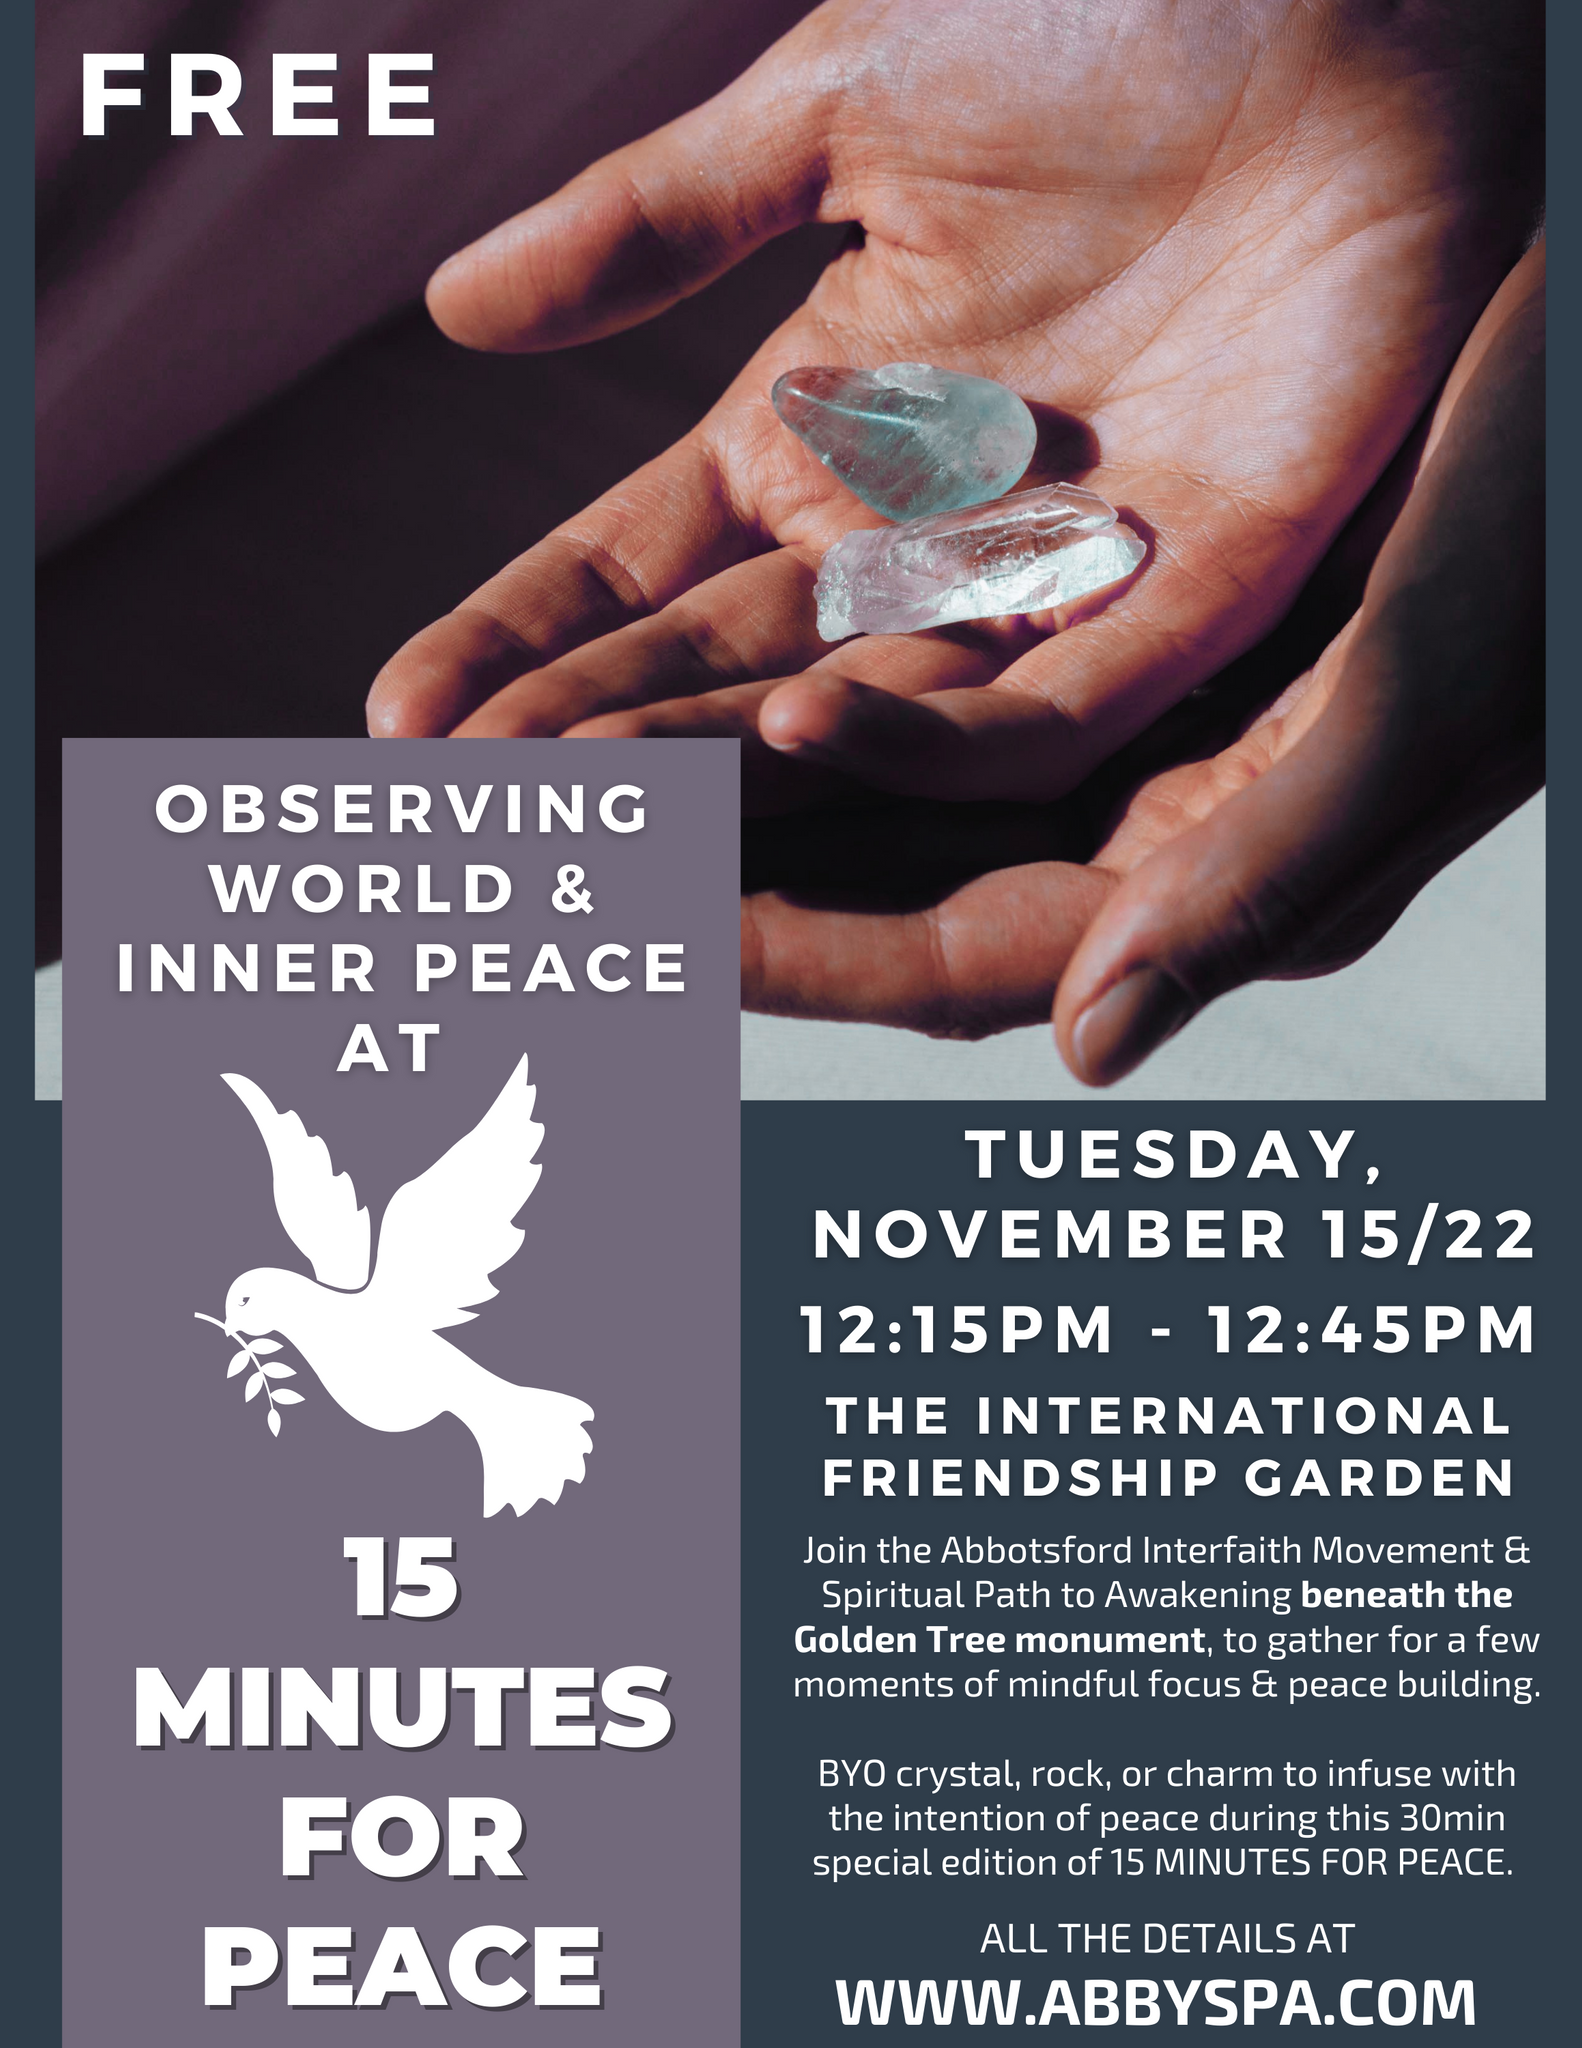 Observing World & Inner Peace at 15 MINUTES FOR PEACE